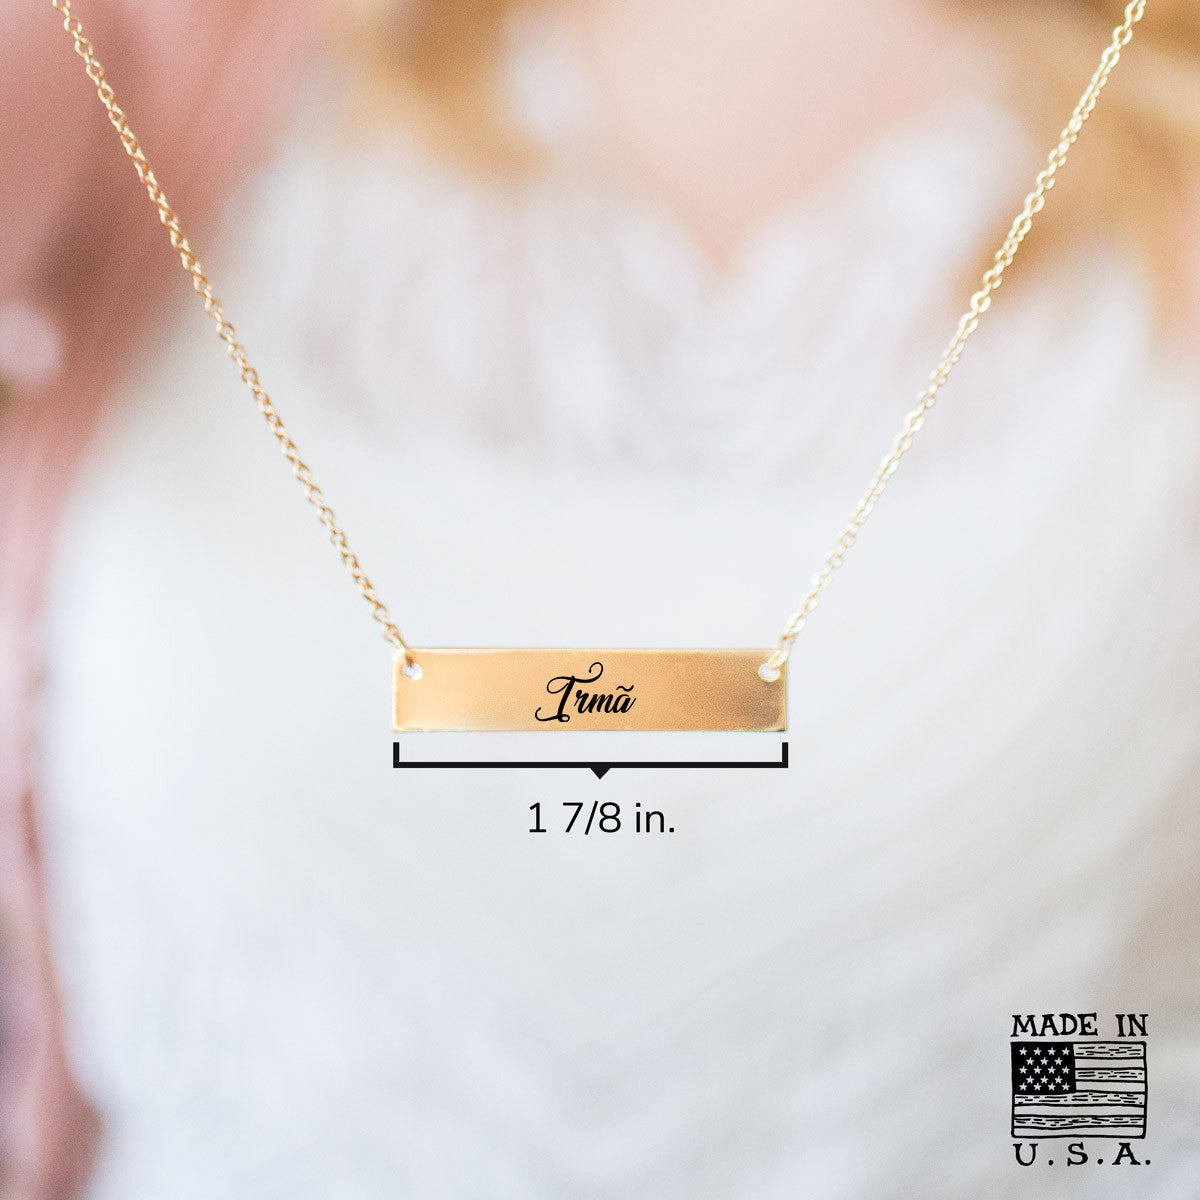 Irmã Gold / Silver Bar Necklace - pipercleo.com